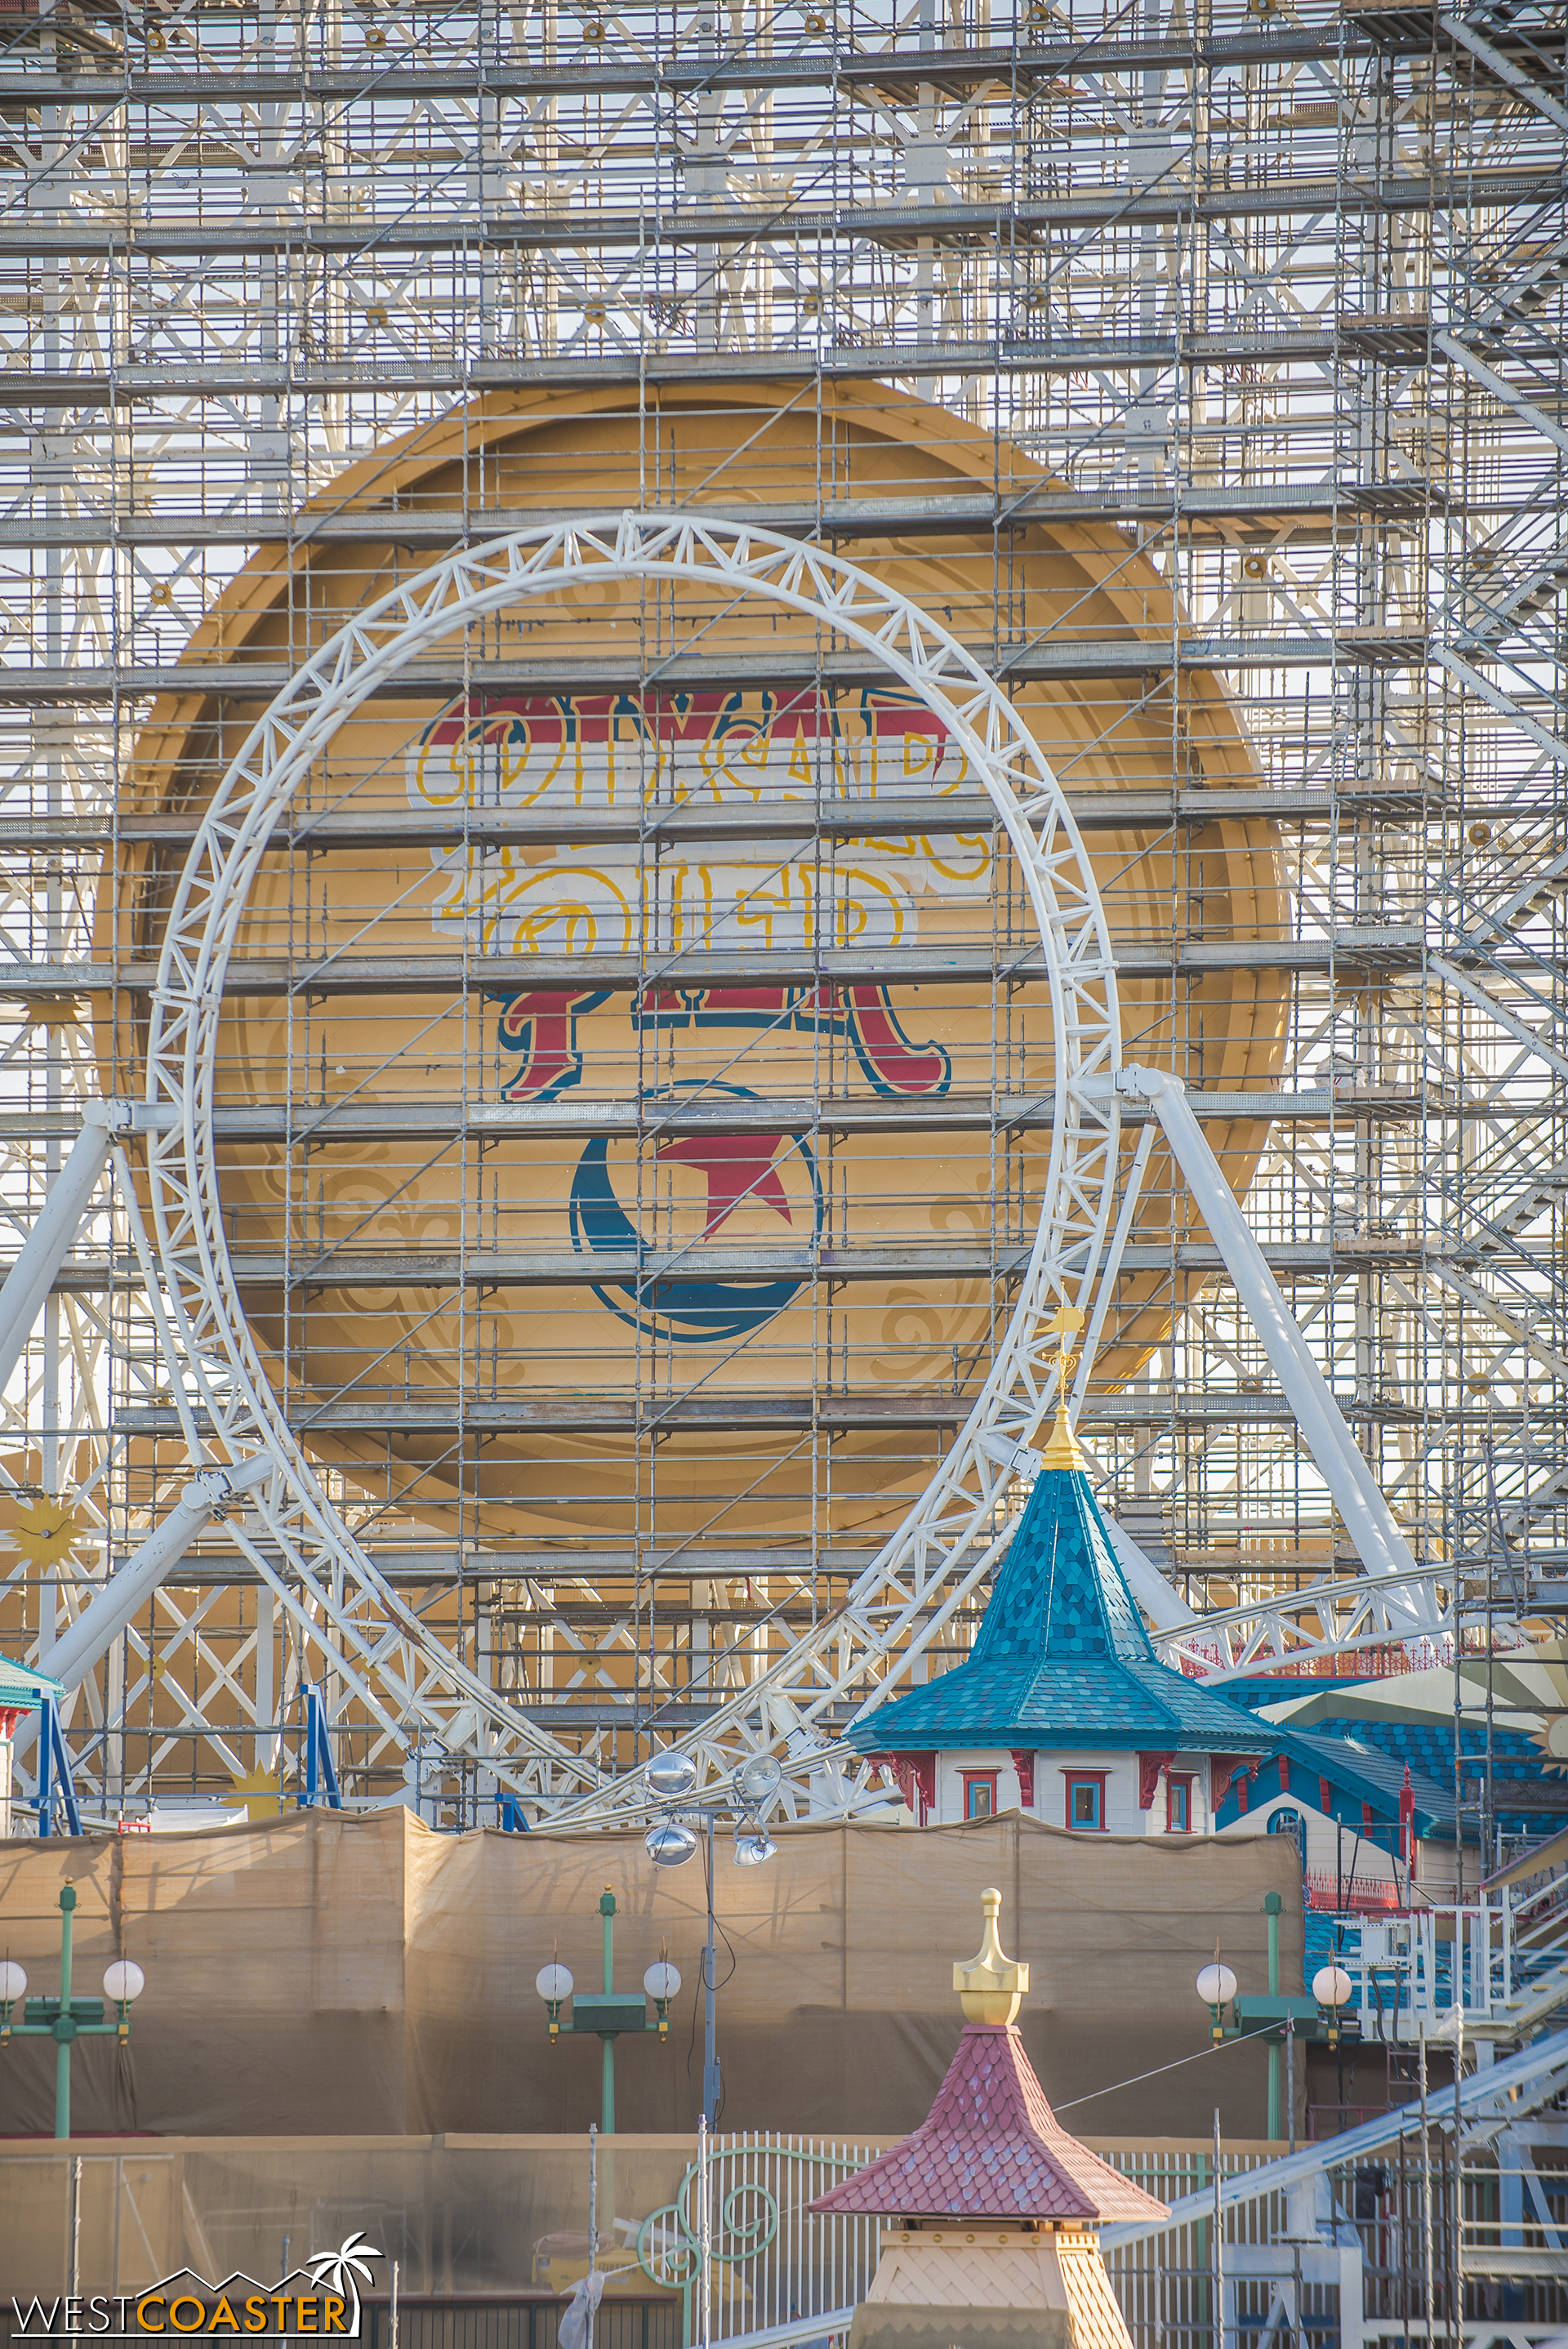  A new graphic has appeared behind the loop of the roller coaster. 